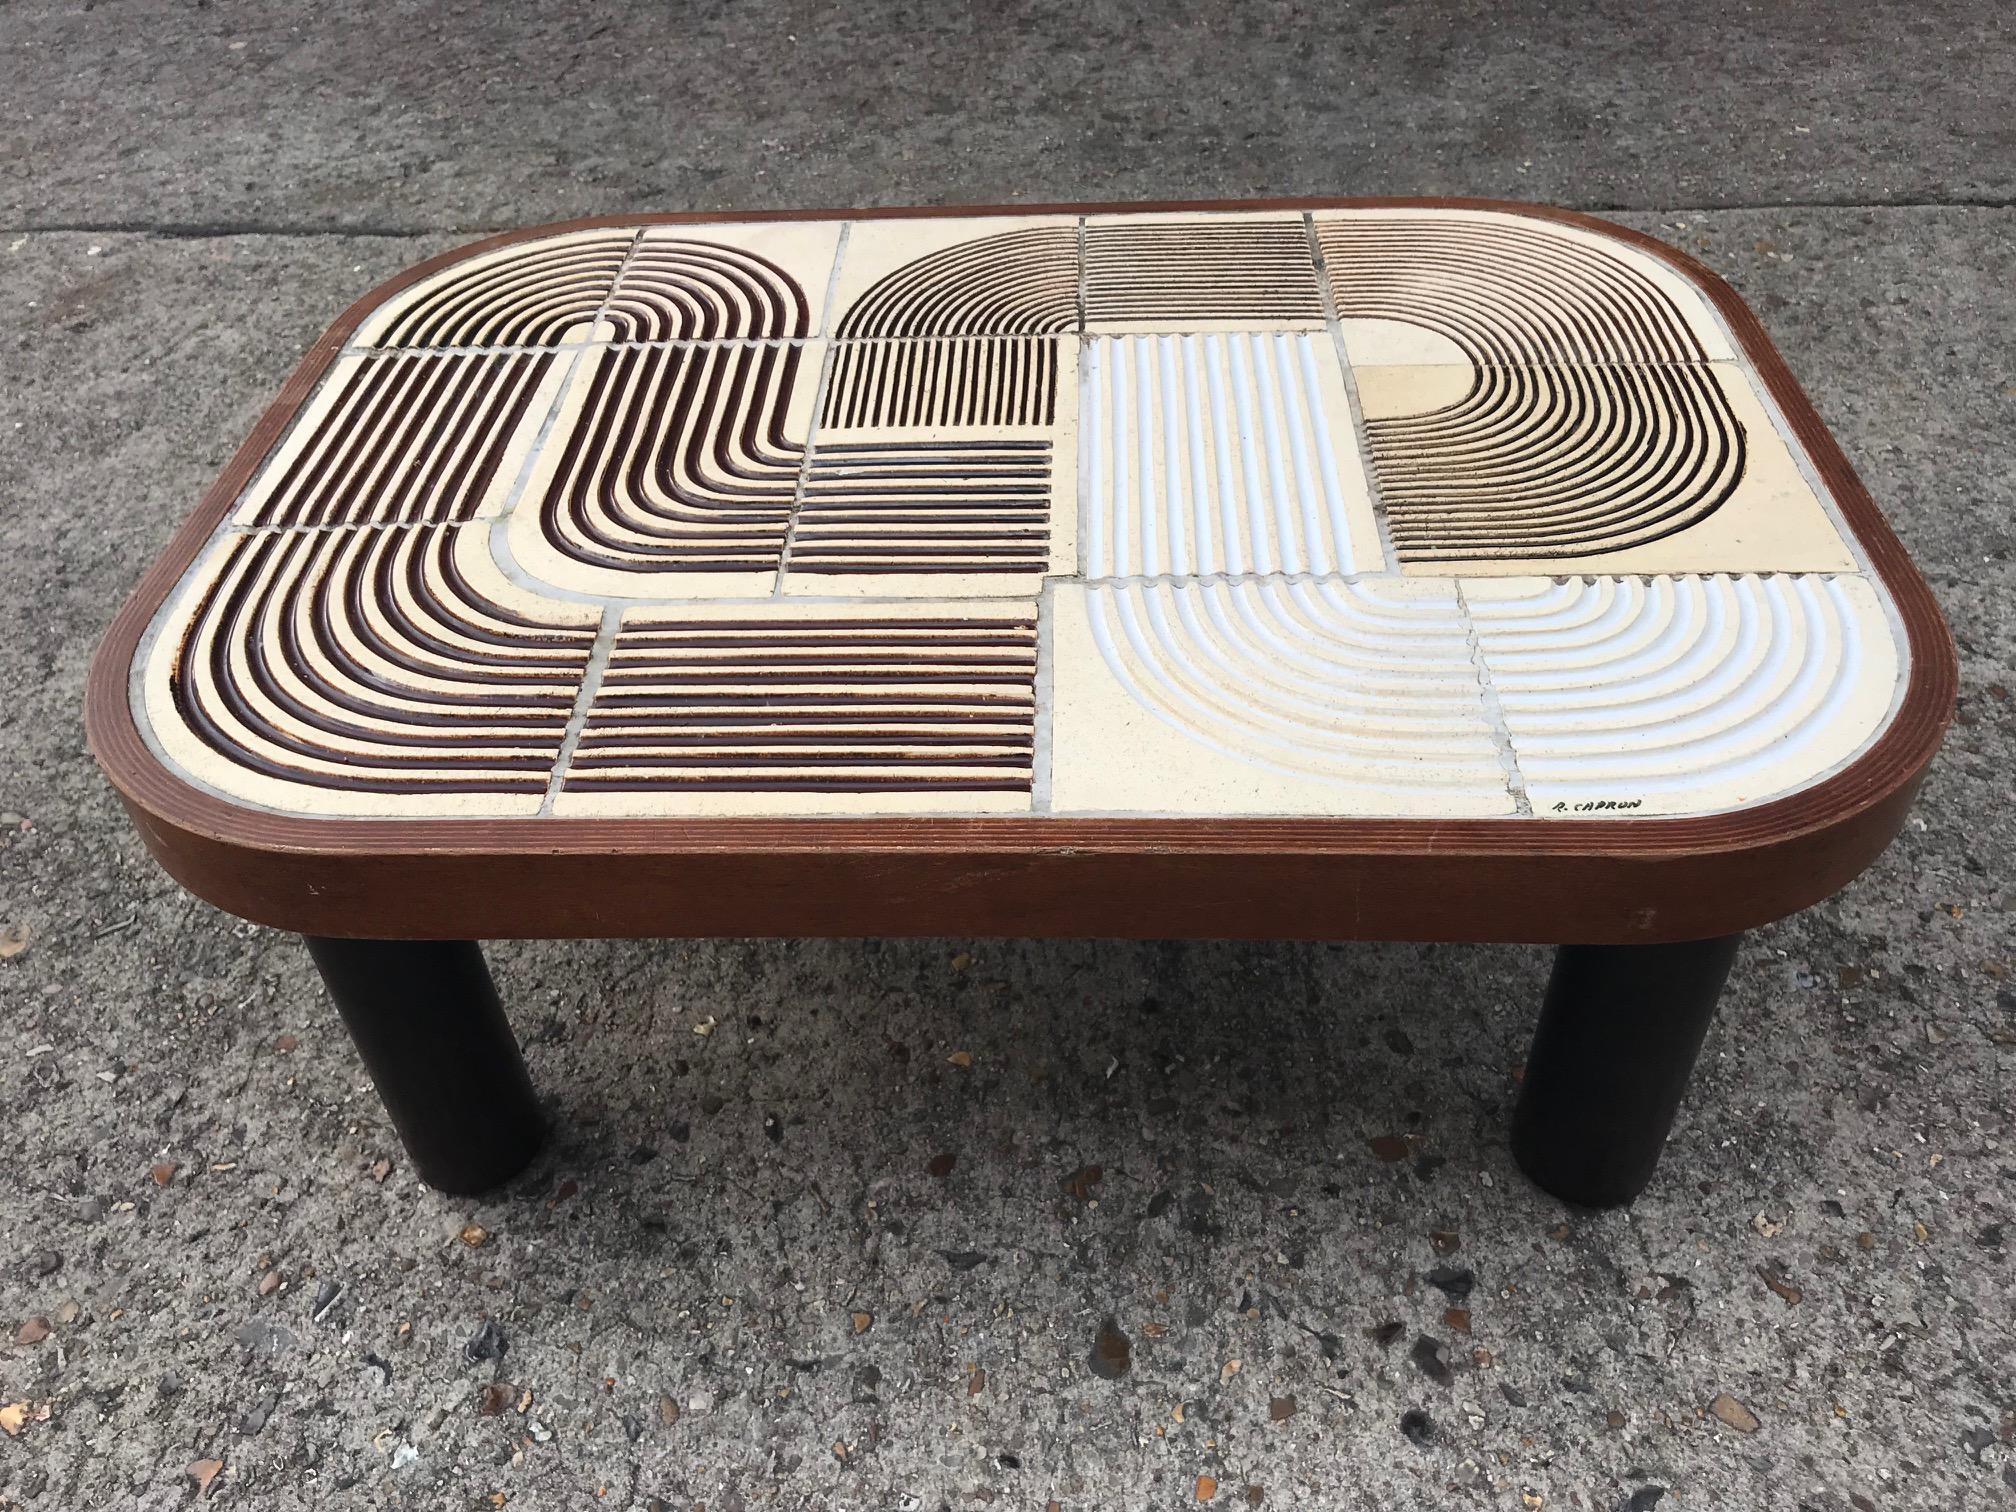 French Ceramic Coffee Table by Roger Capron, Vallauris, France, 1960-70s